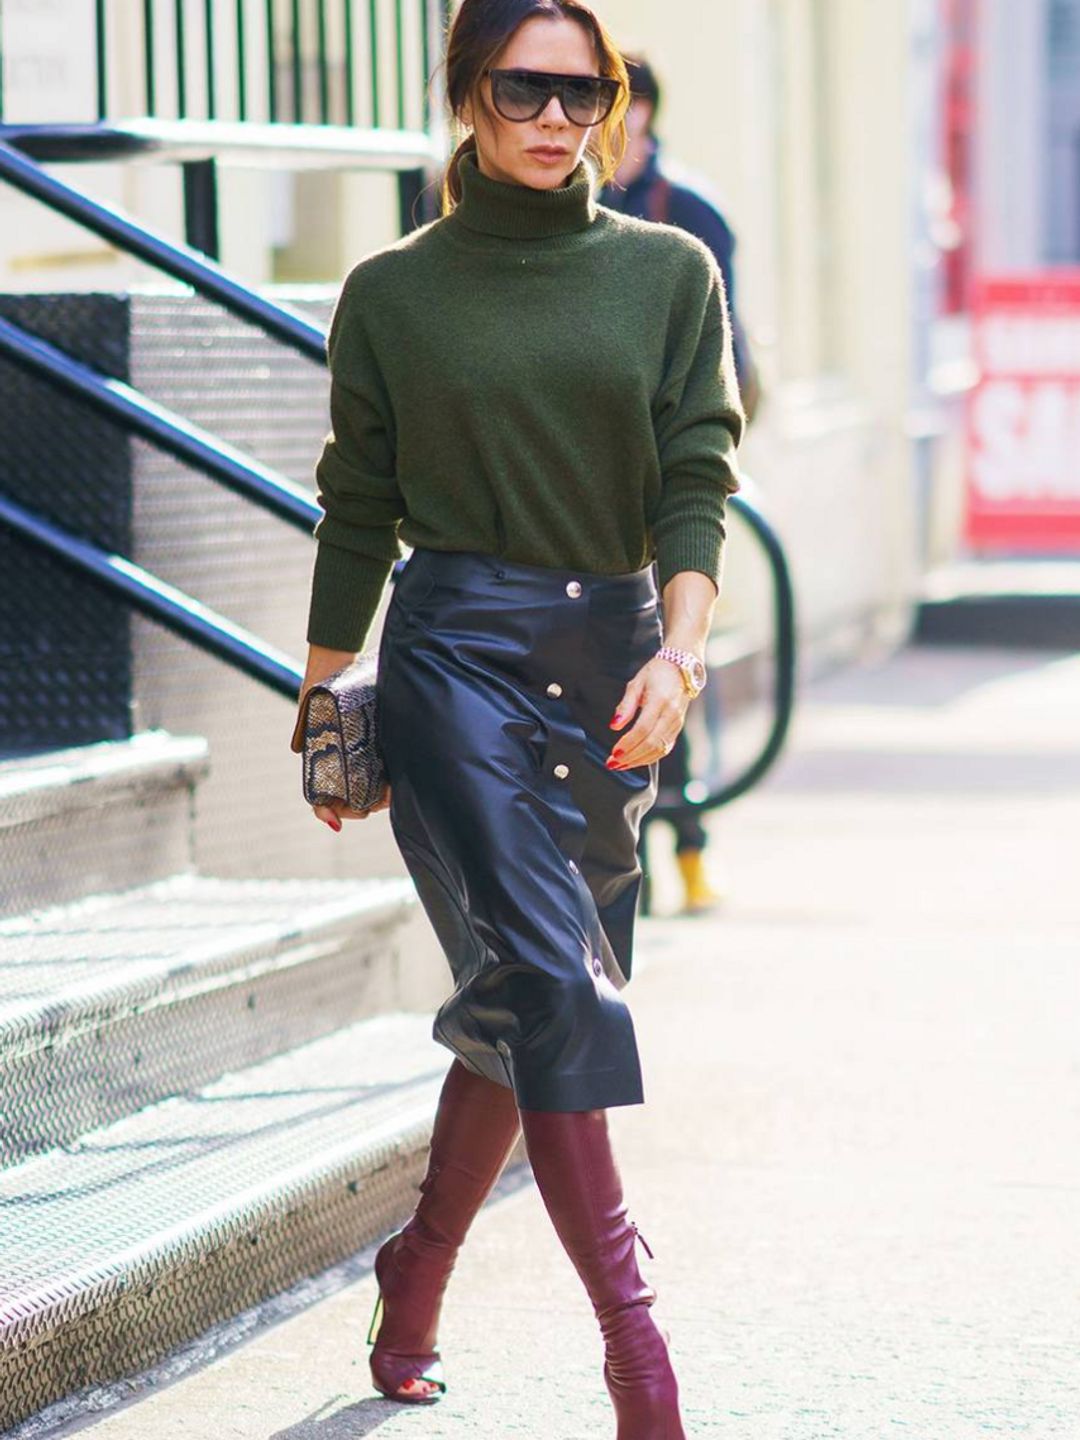 Victoria Beckham wears a leather midi skirt, green sweater and burgundy boots